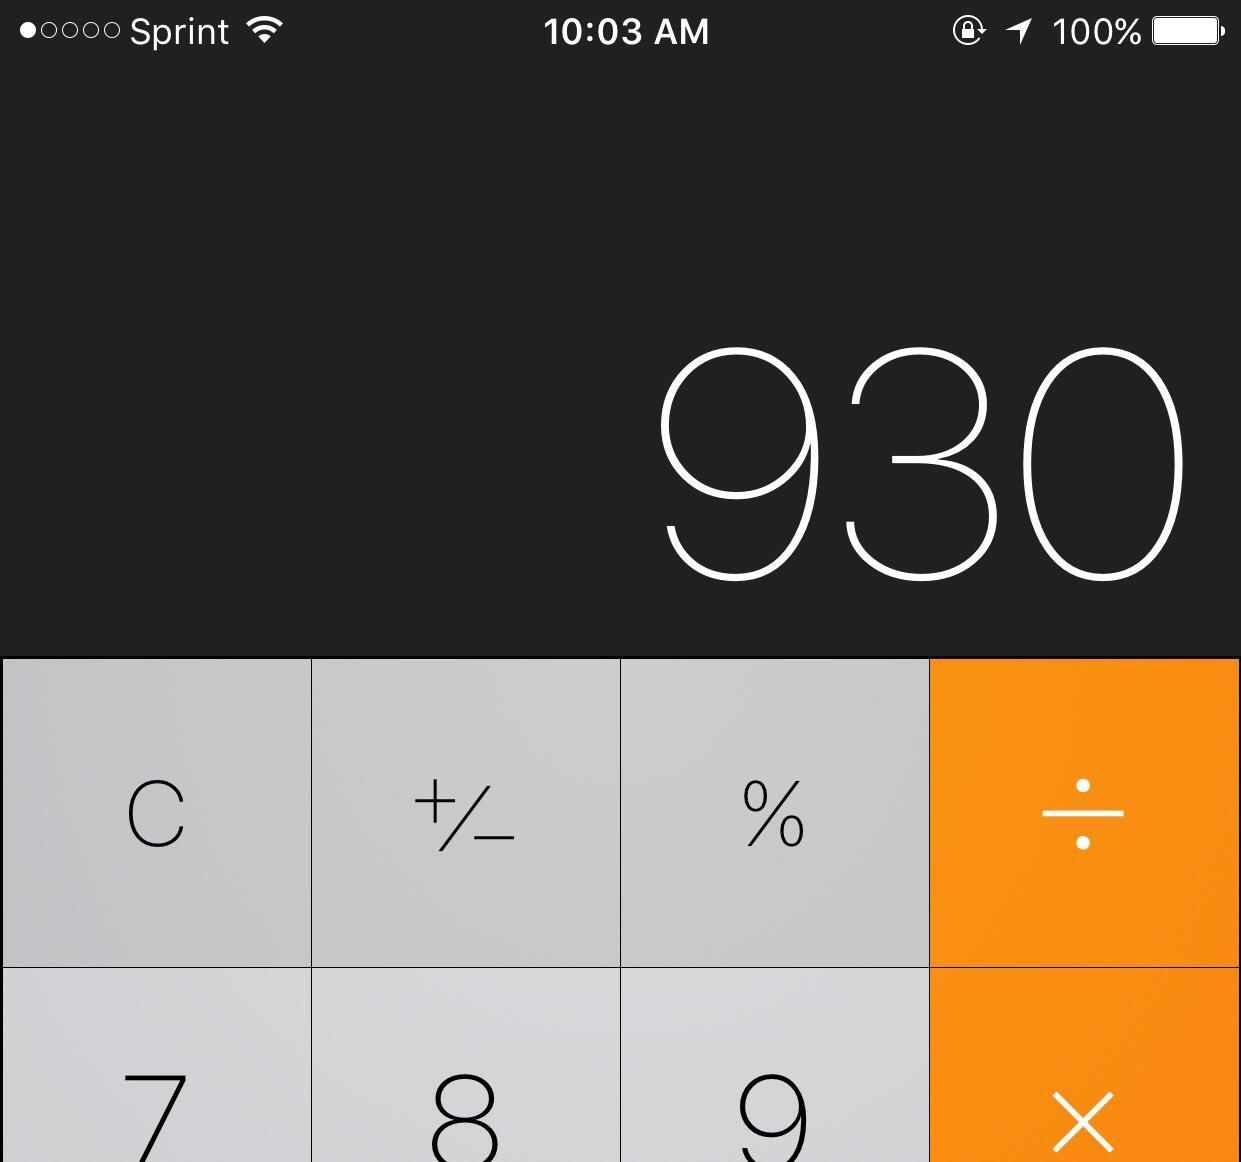 Found out why my alarm didn't go off at 9:30.